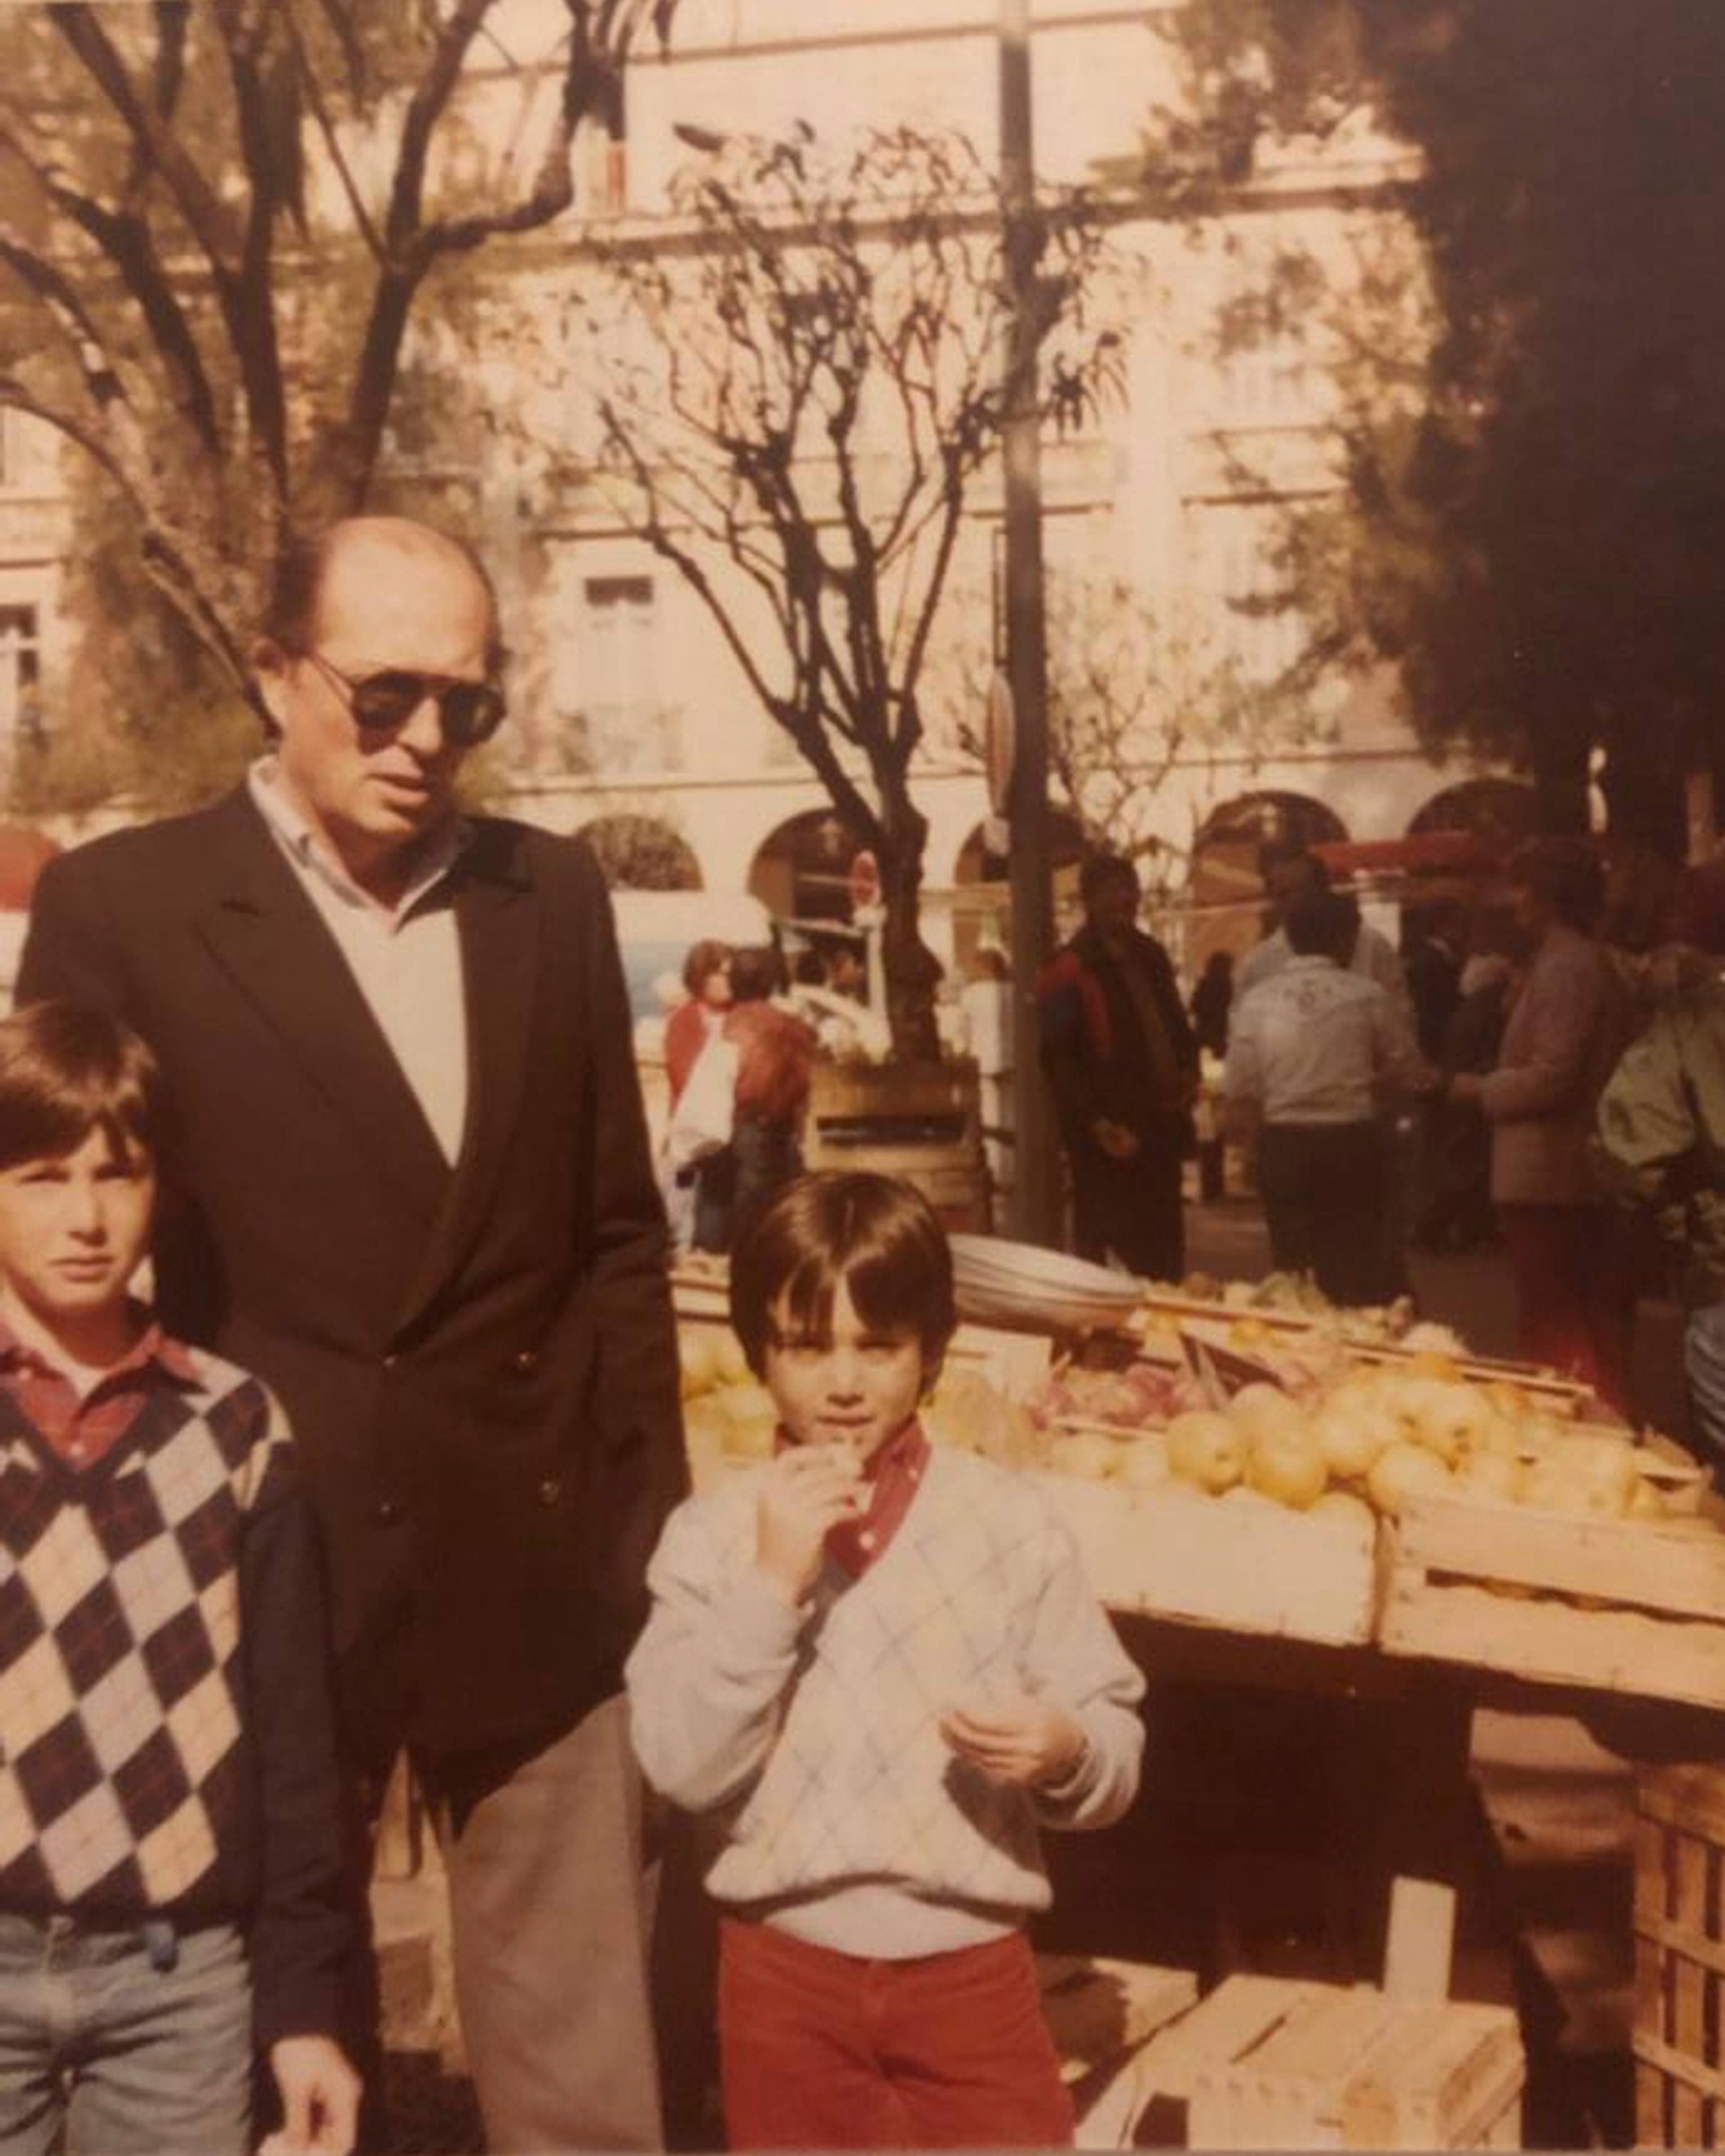 Photograph of Franco as a child at a market with his step-father and brother